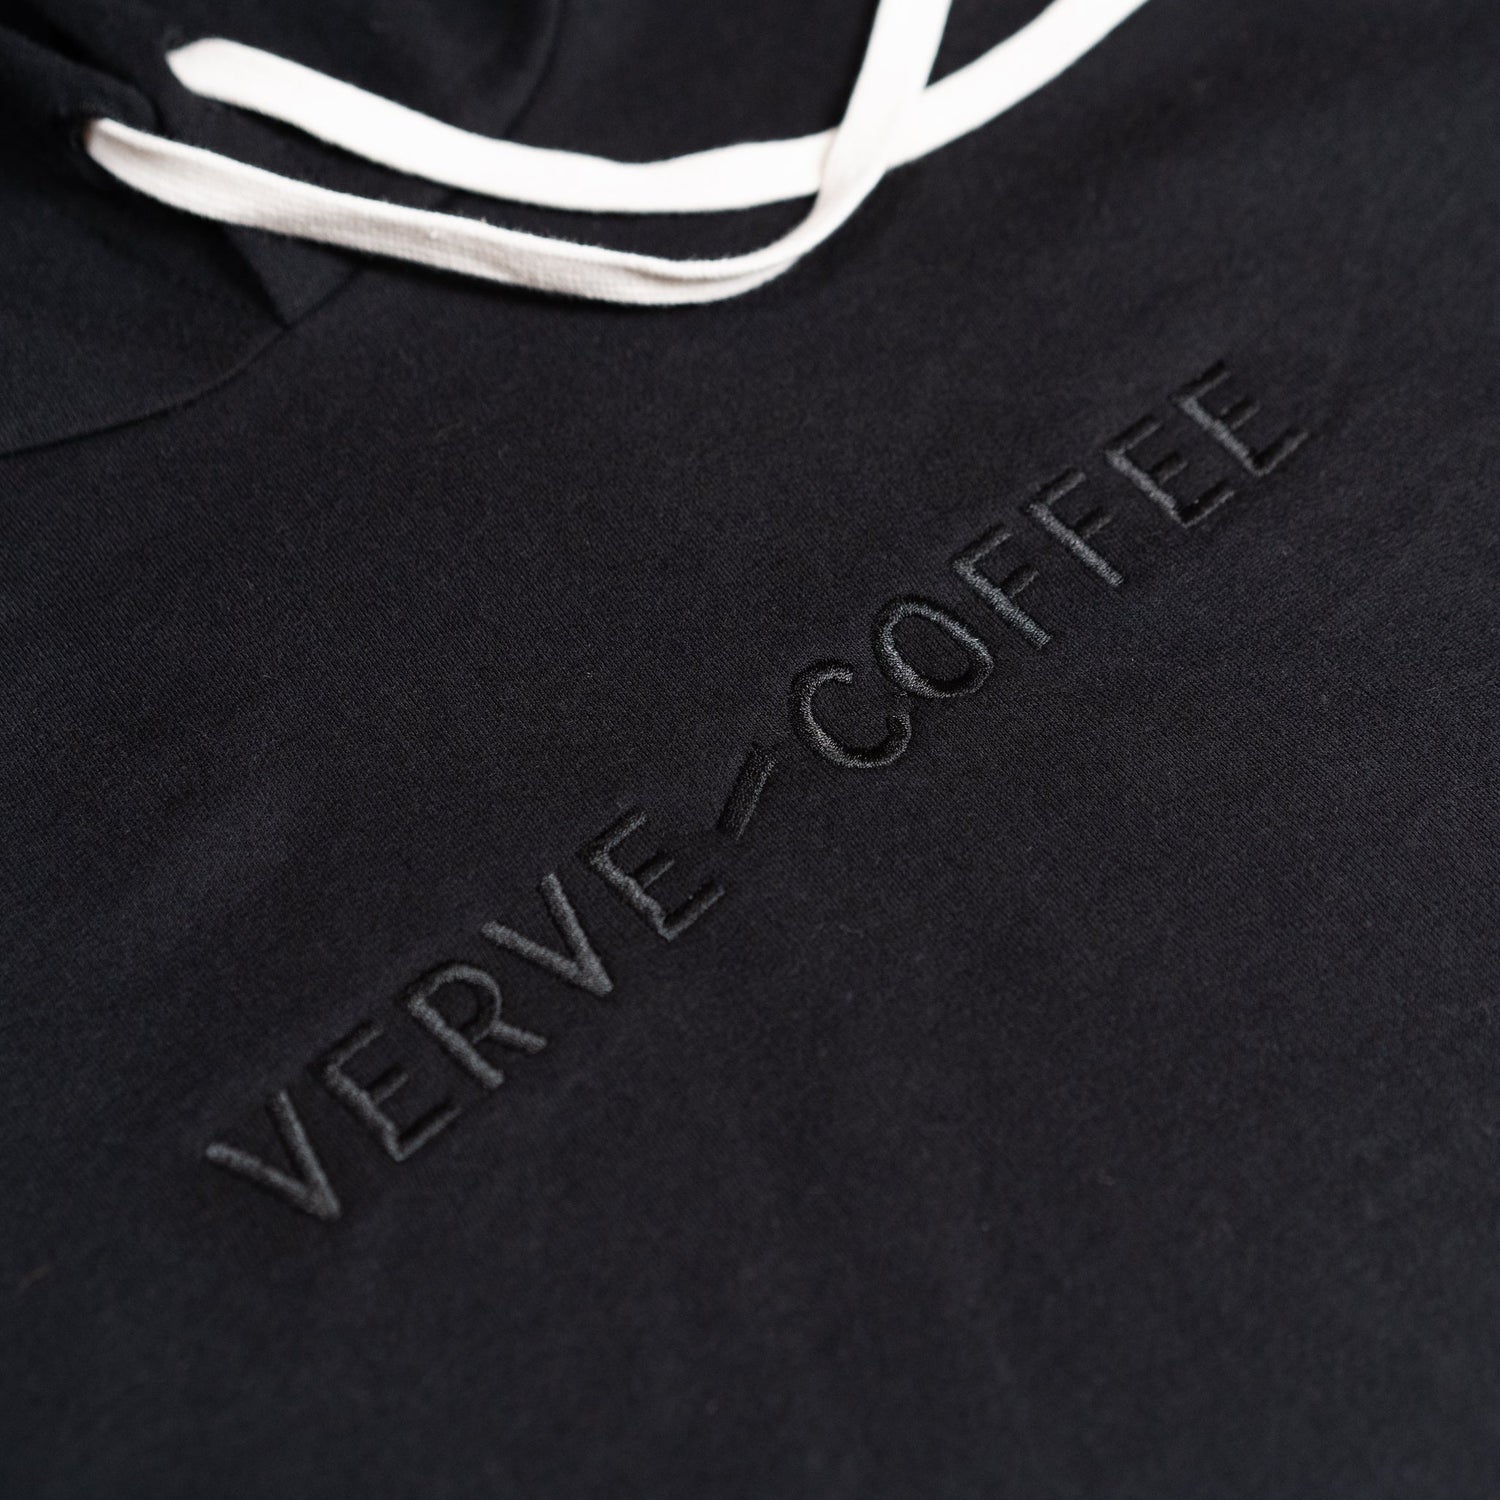 "verve coffee" embroidery detail